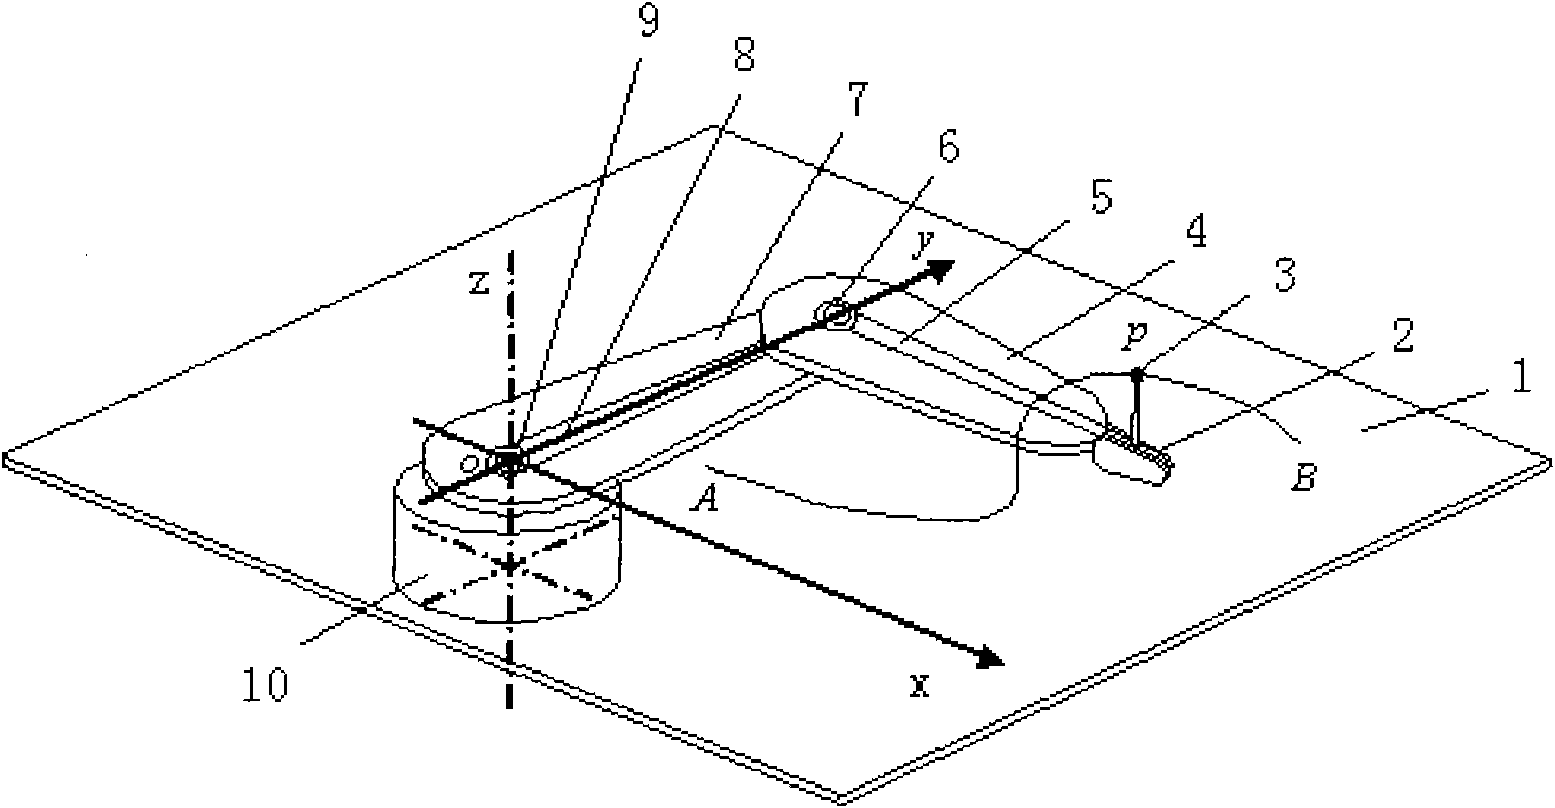 Motion track research device of points